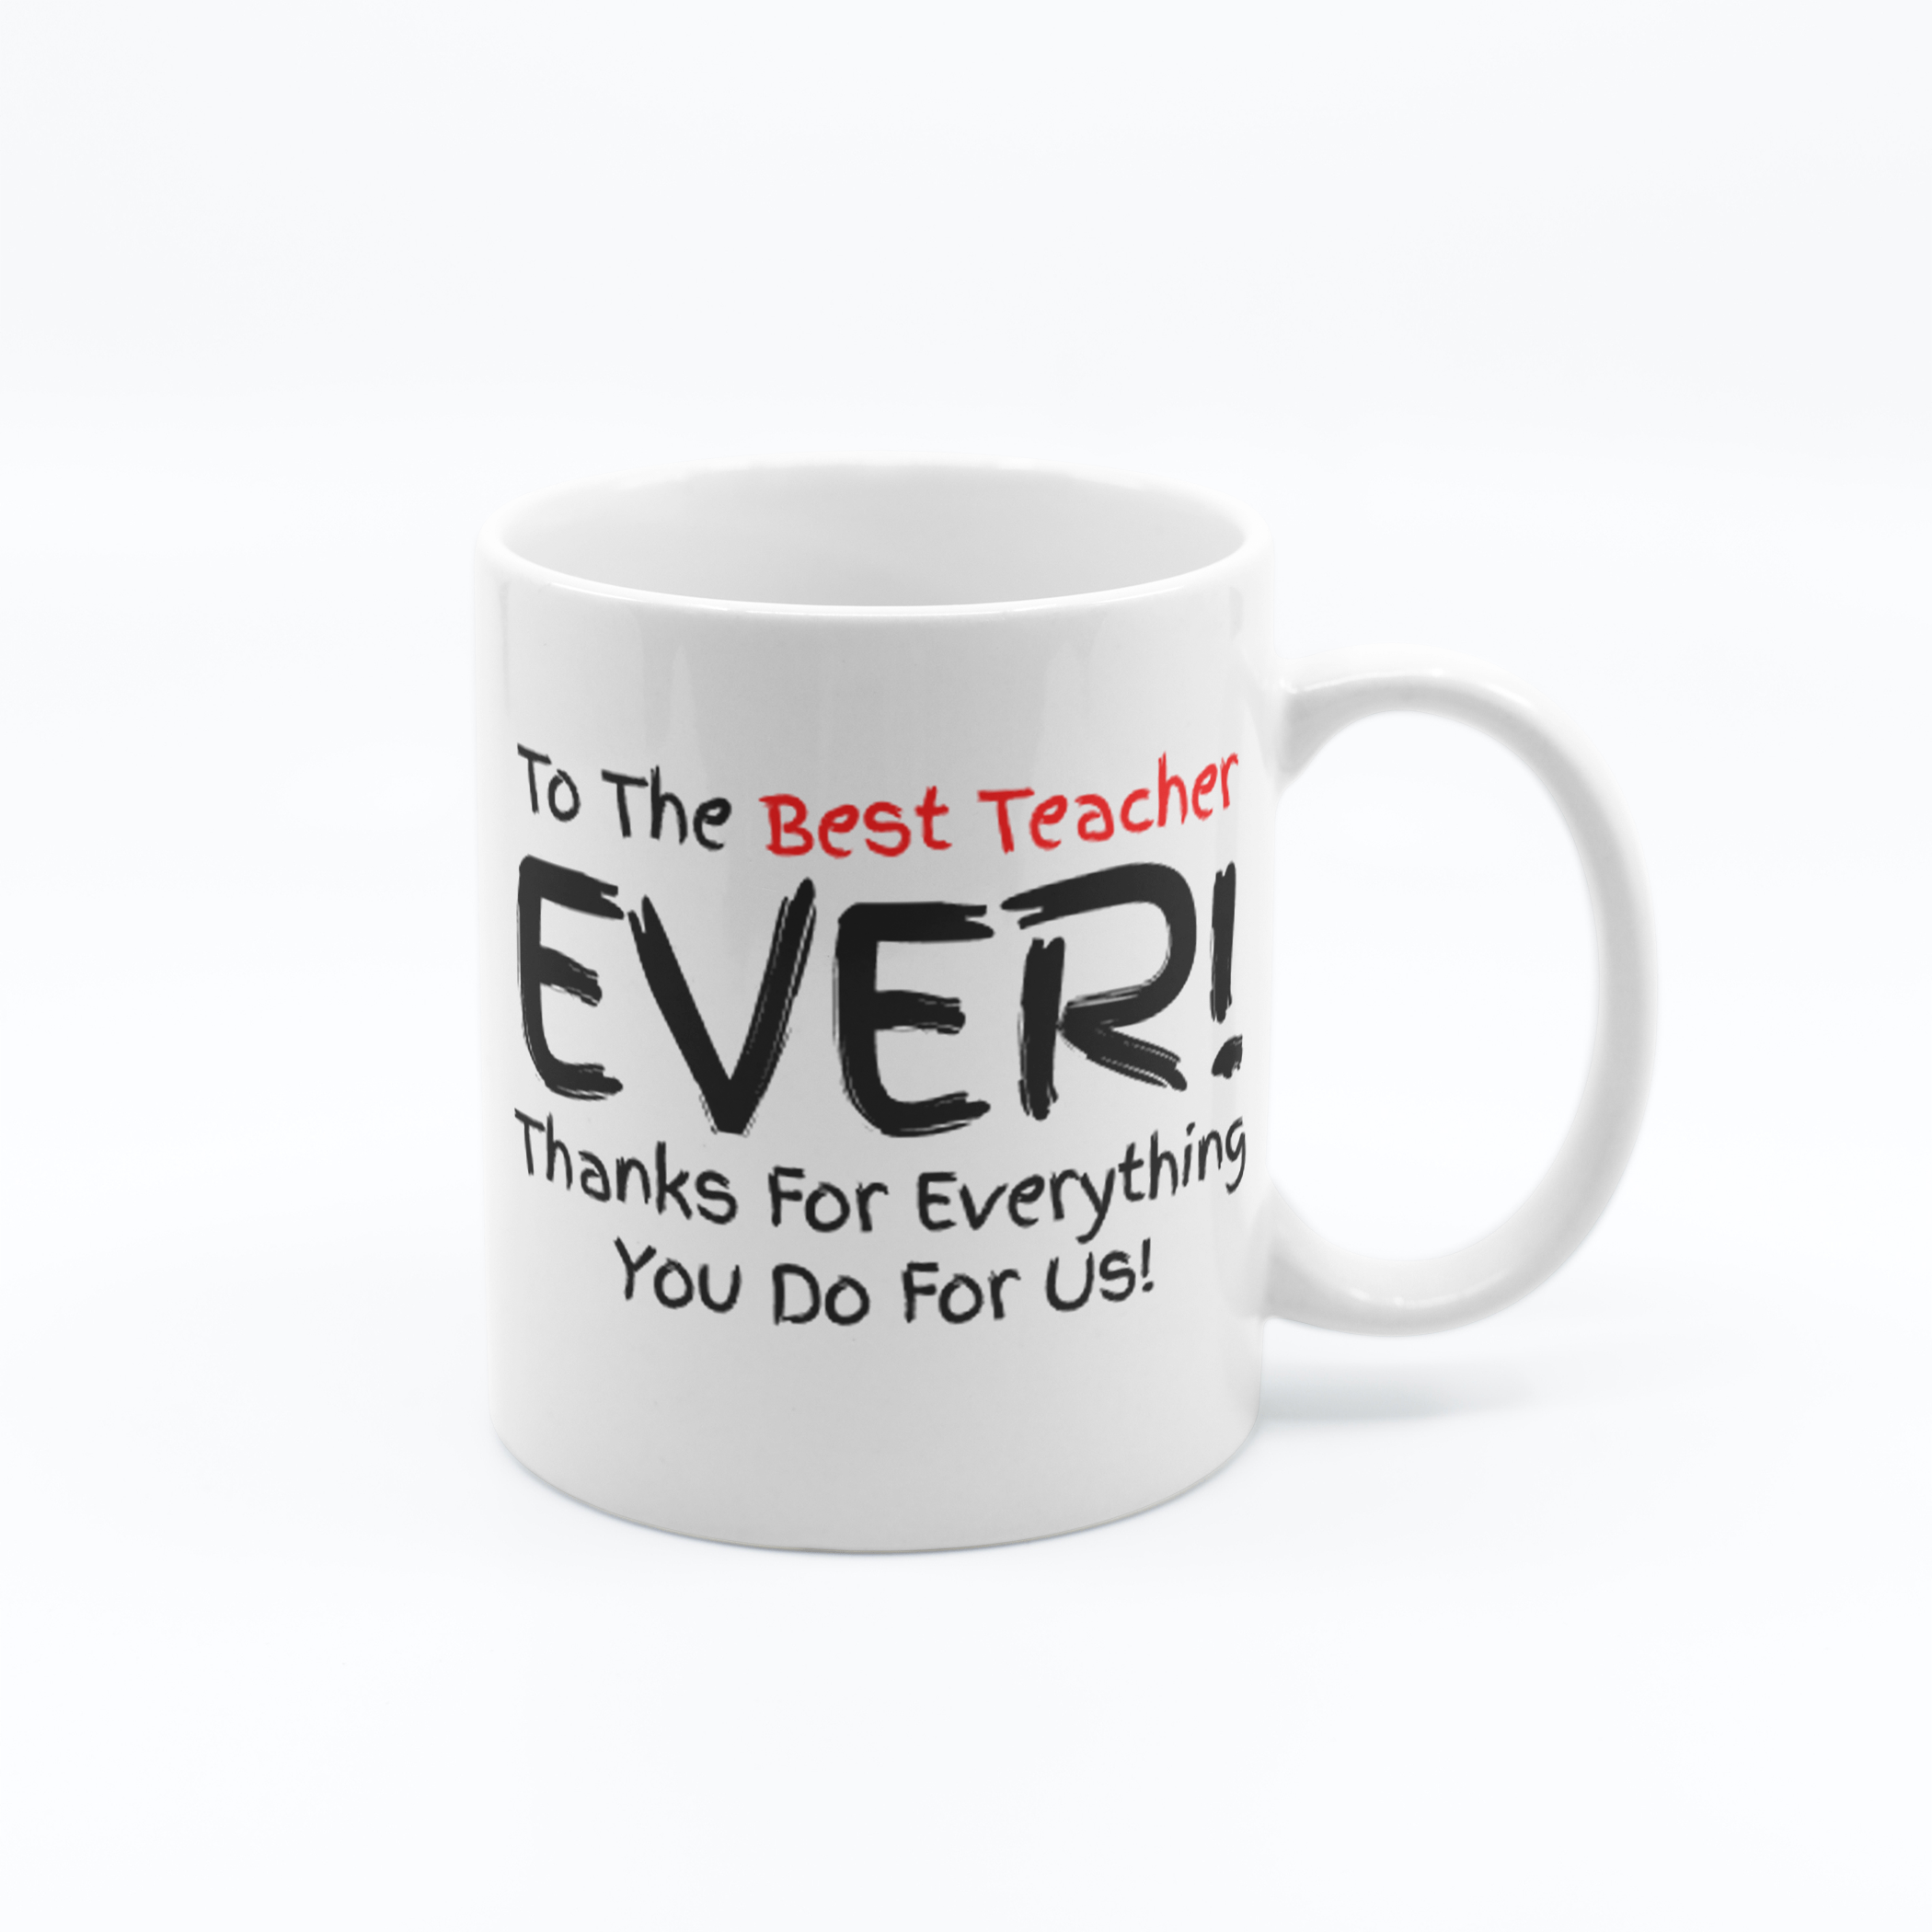 Non-Personalized Best Teach Ever Mug